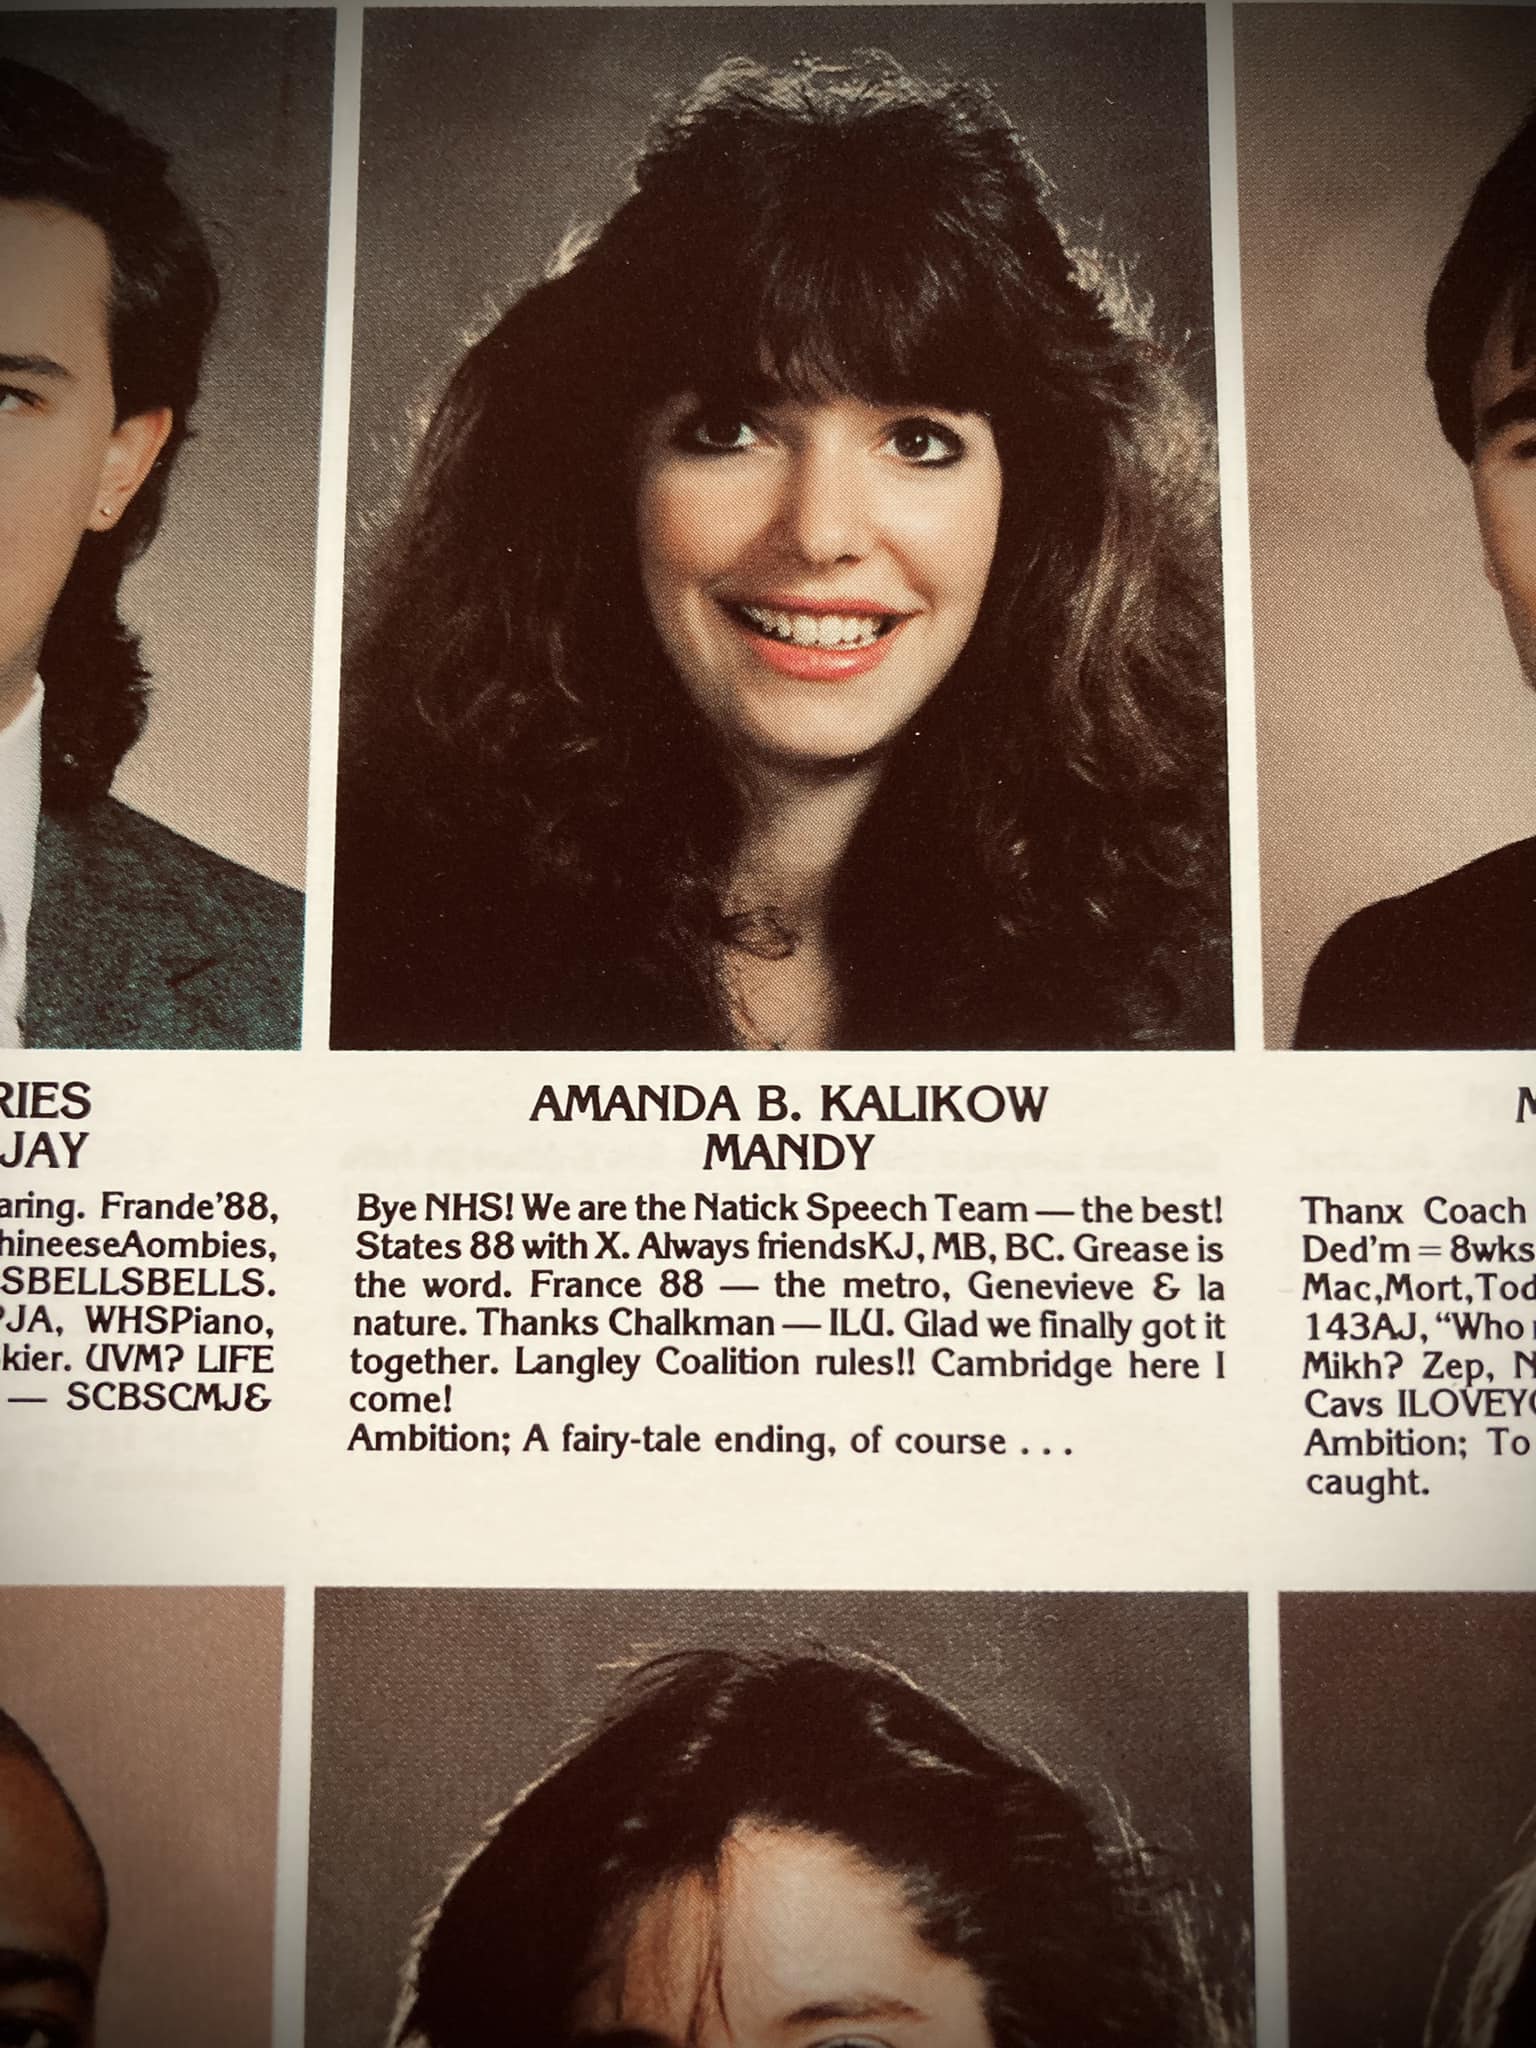 My photo and bio from my high school yearbook, with partial photos and bios of my classmates surrounding mine